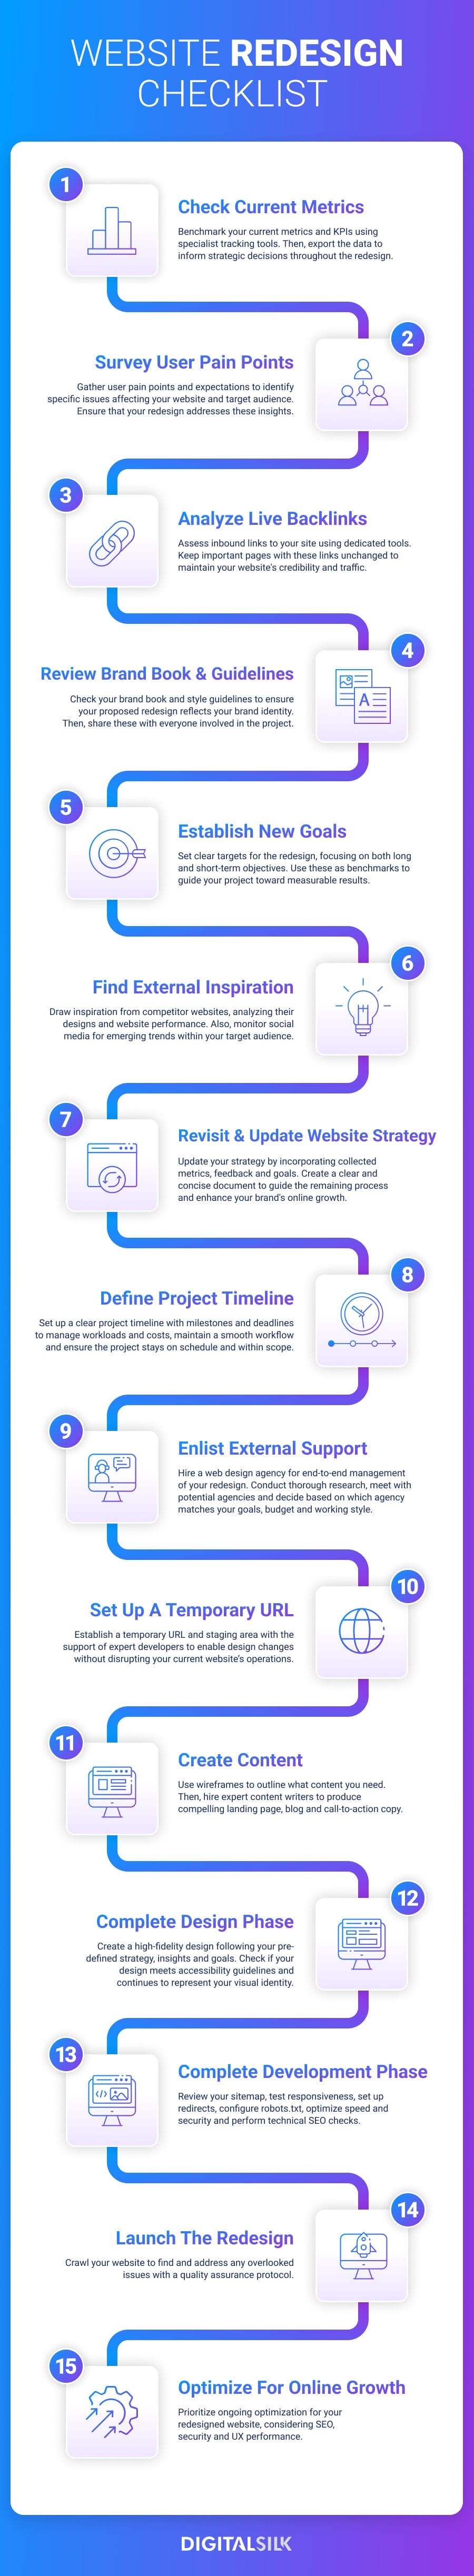 An infographic showing the 15 essential website redesign checklist steps.